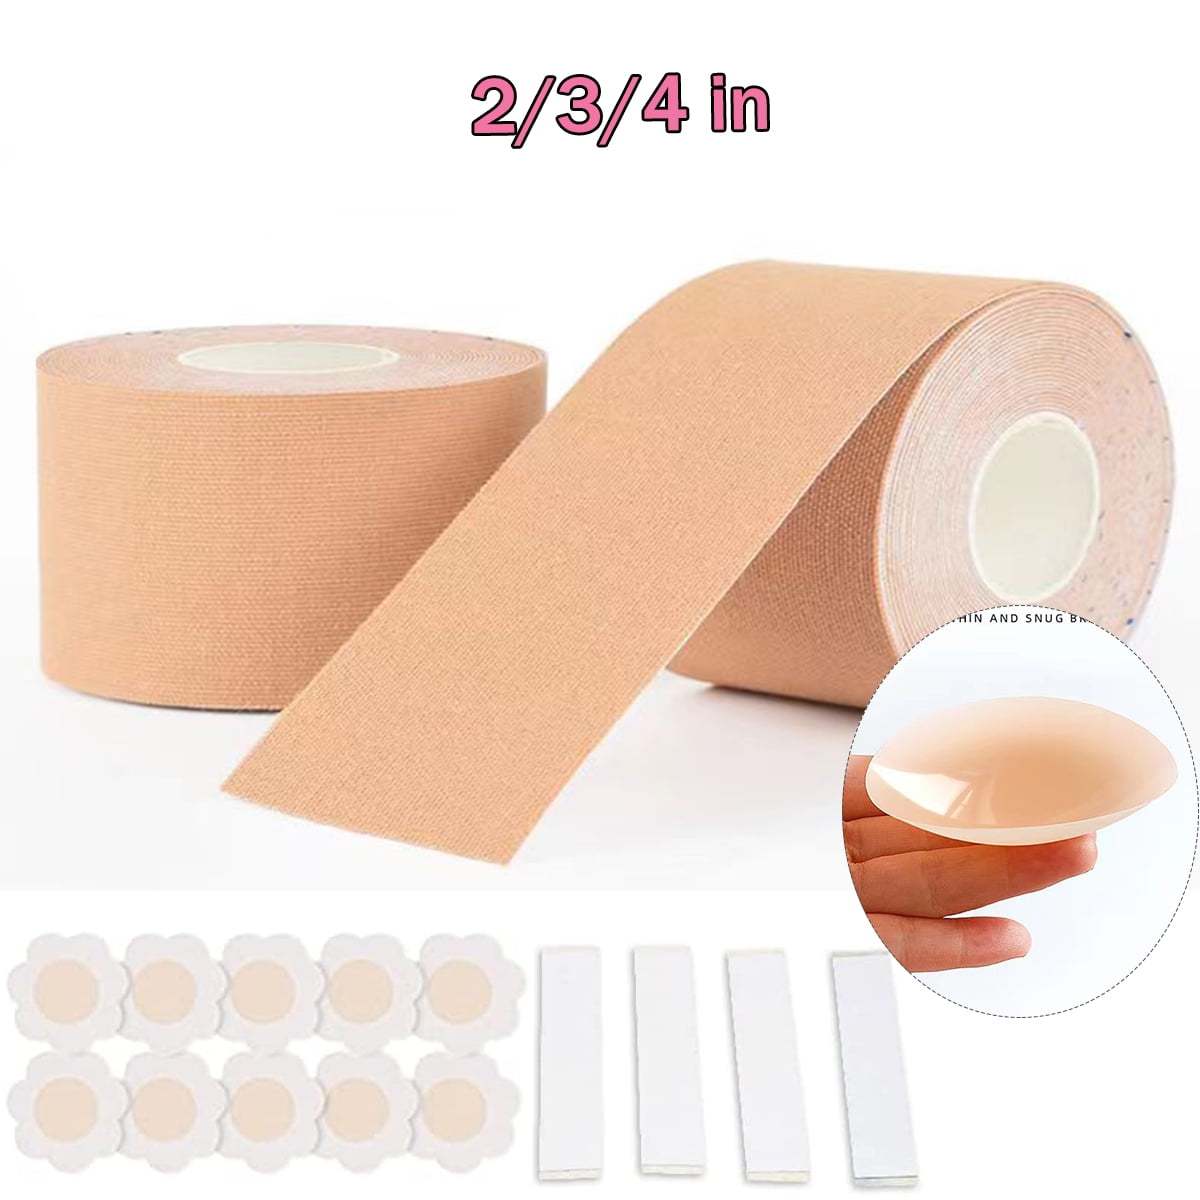 Boob Tape, Boobytape for Breast, Instant Breast Petals Tape Fit